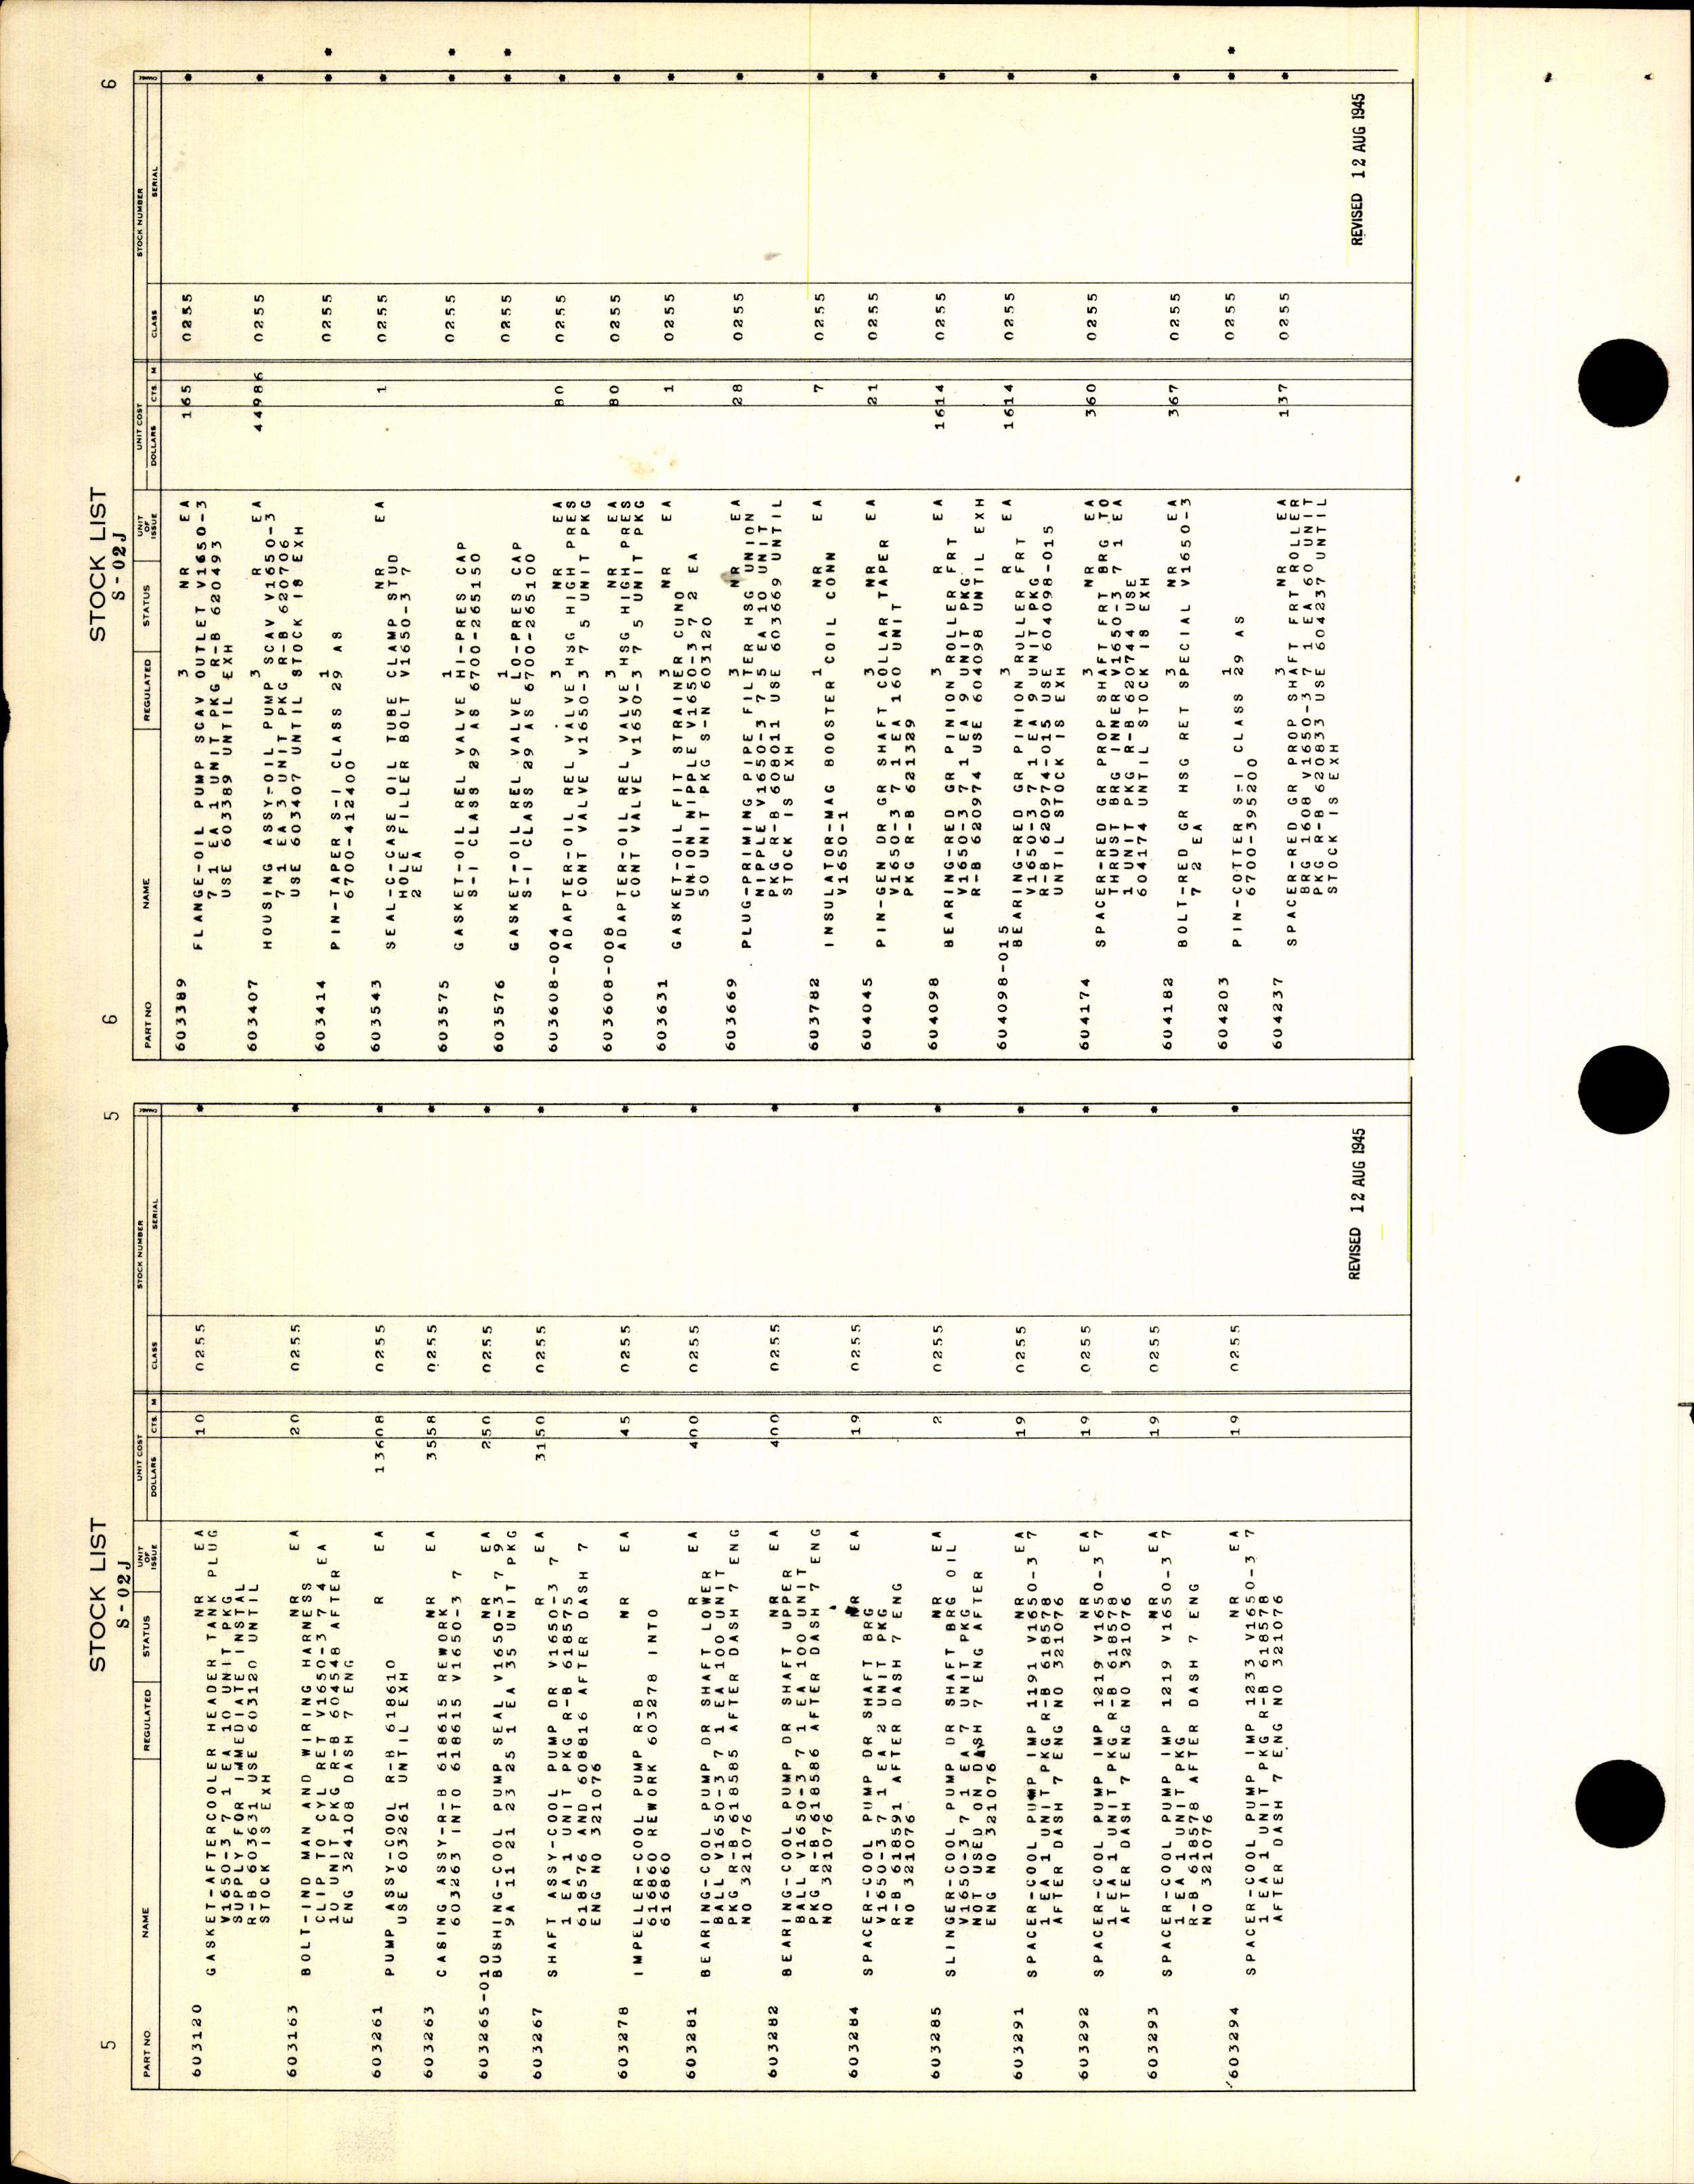 Sample page 6 from AirCorps Library document: Stock List Parts for Rolls-Royce Engines